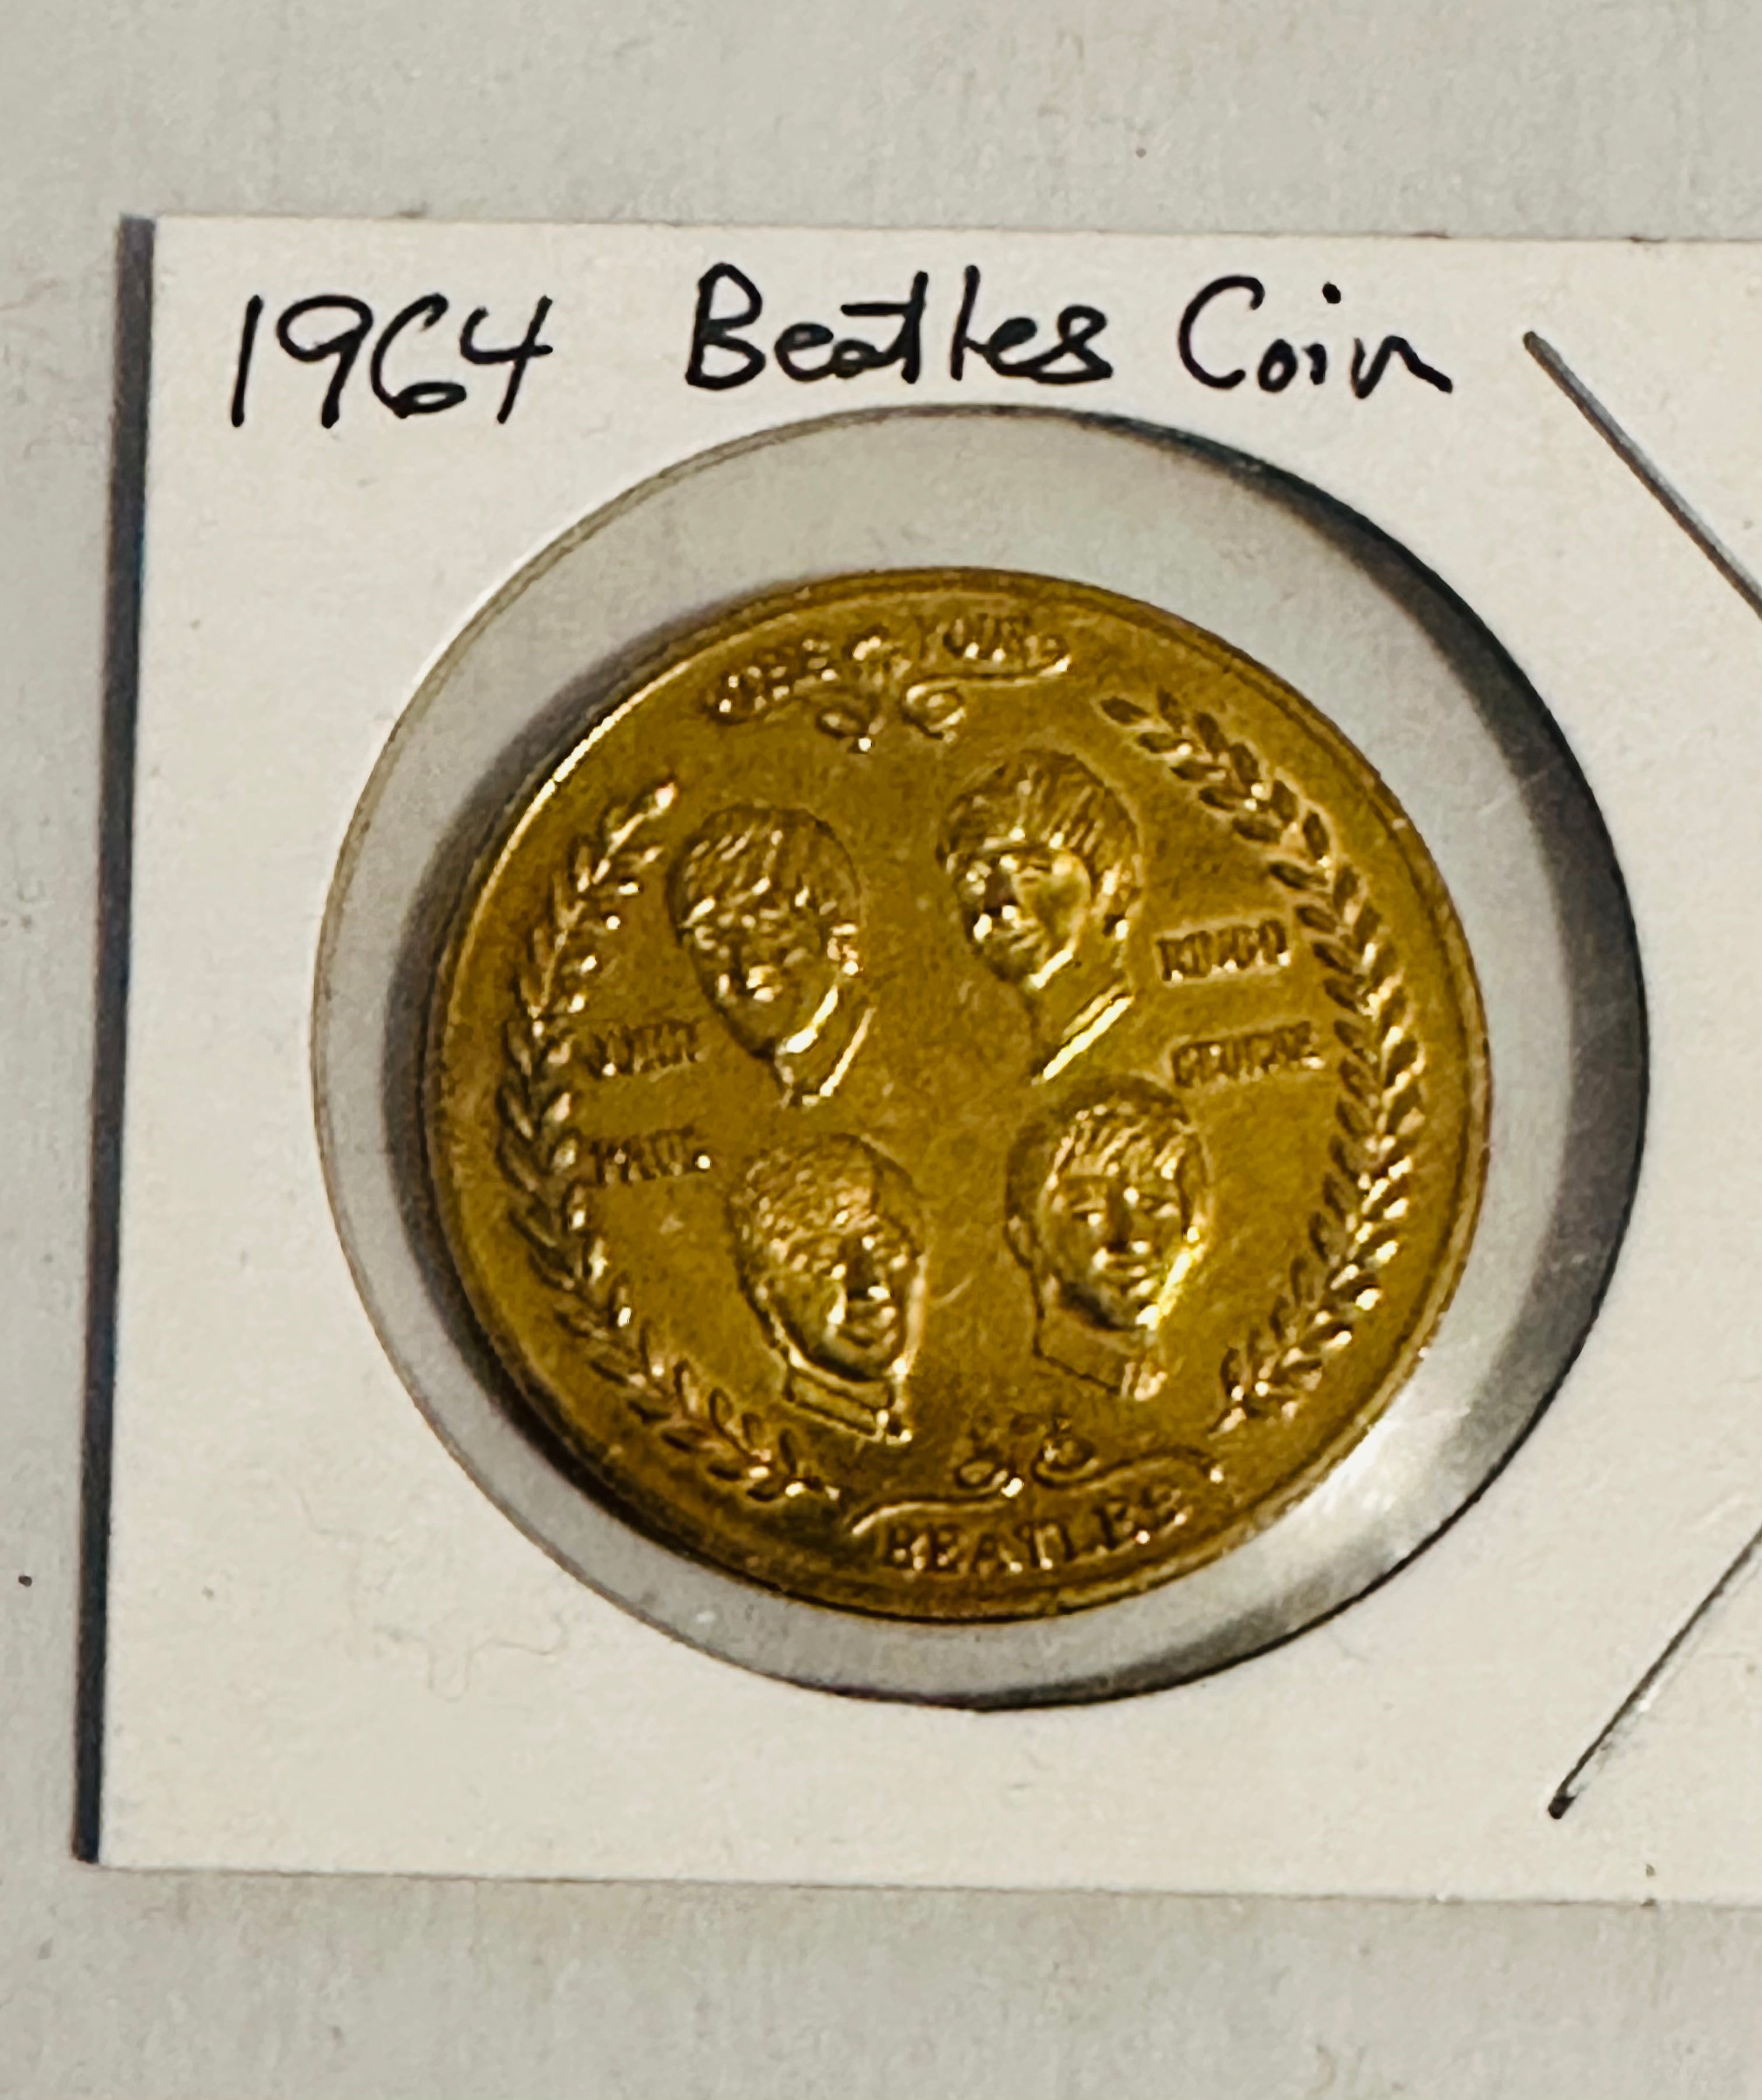 Beatles rare limited issued coin 1964